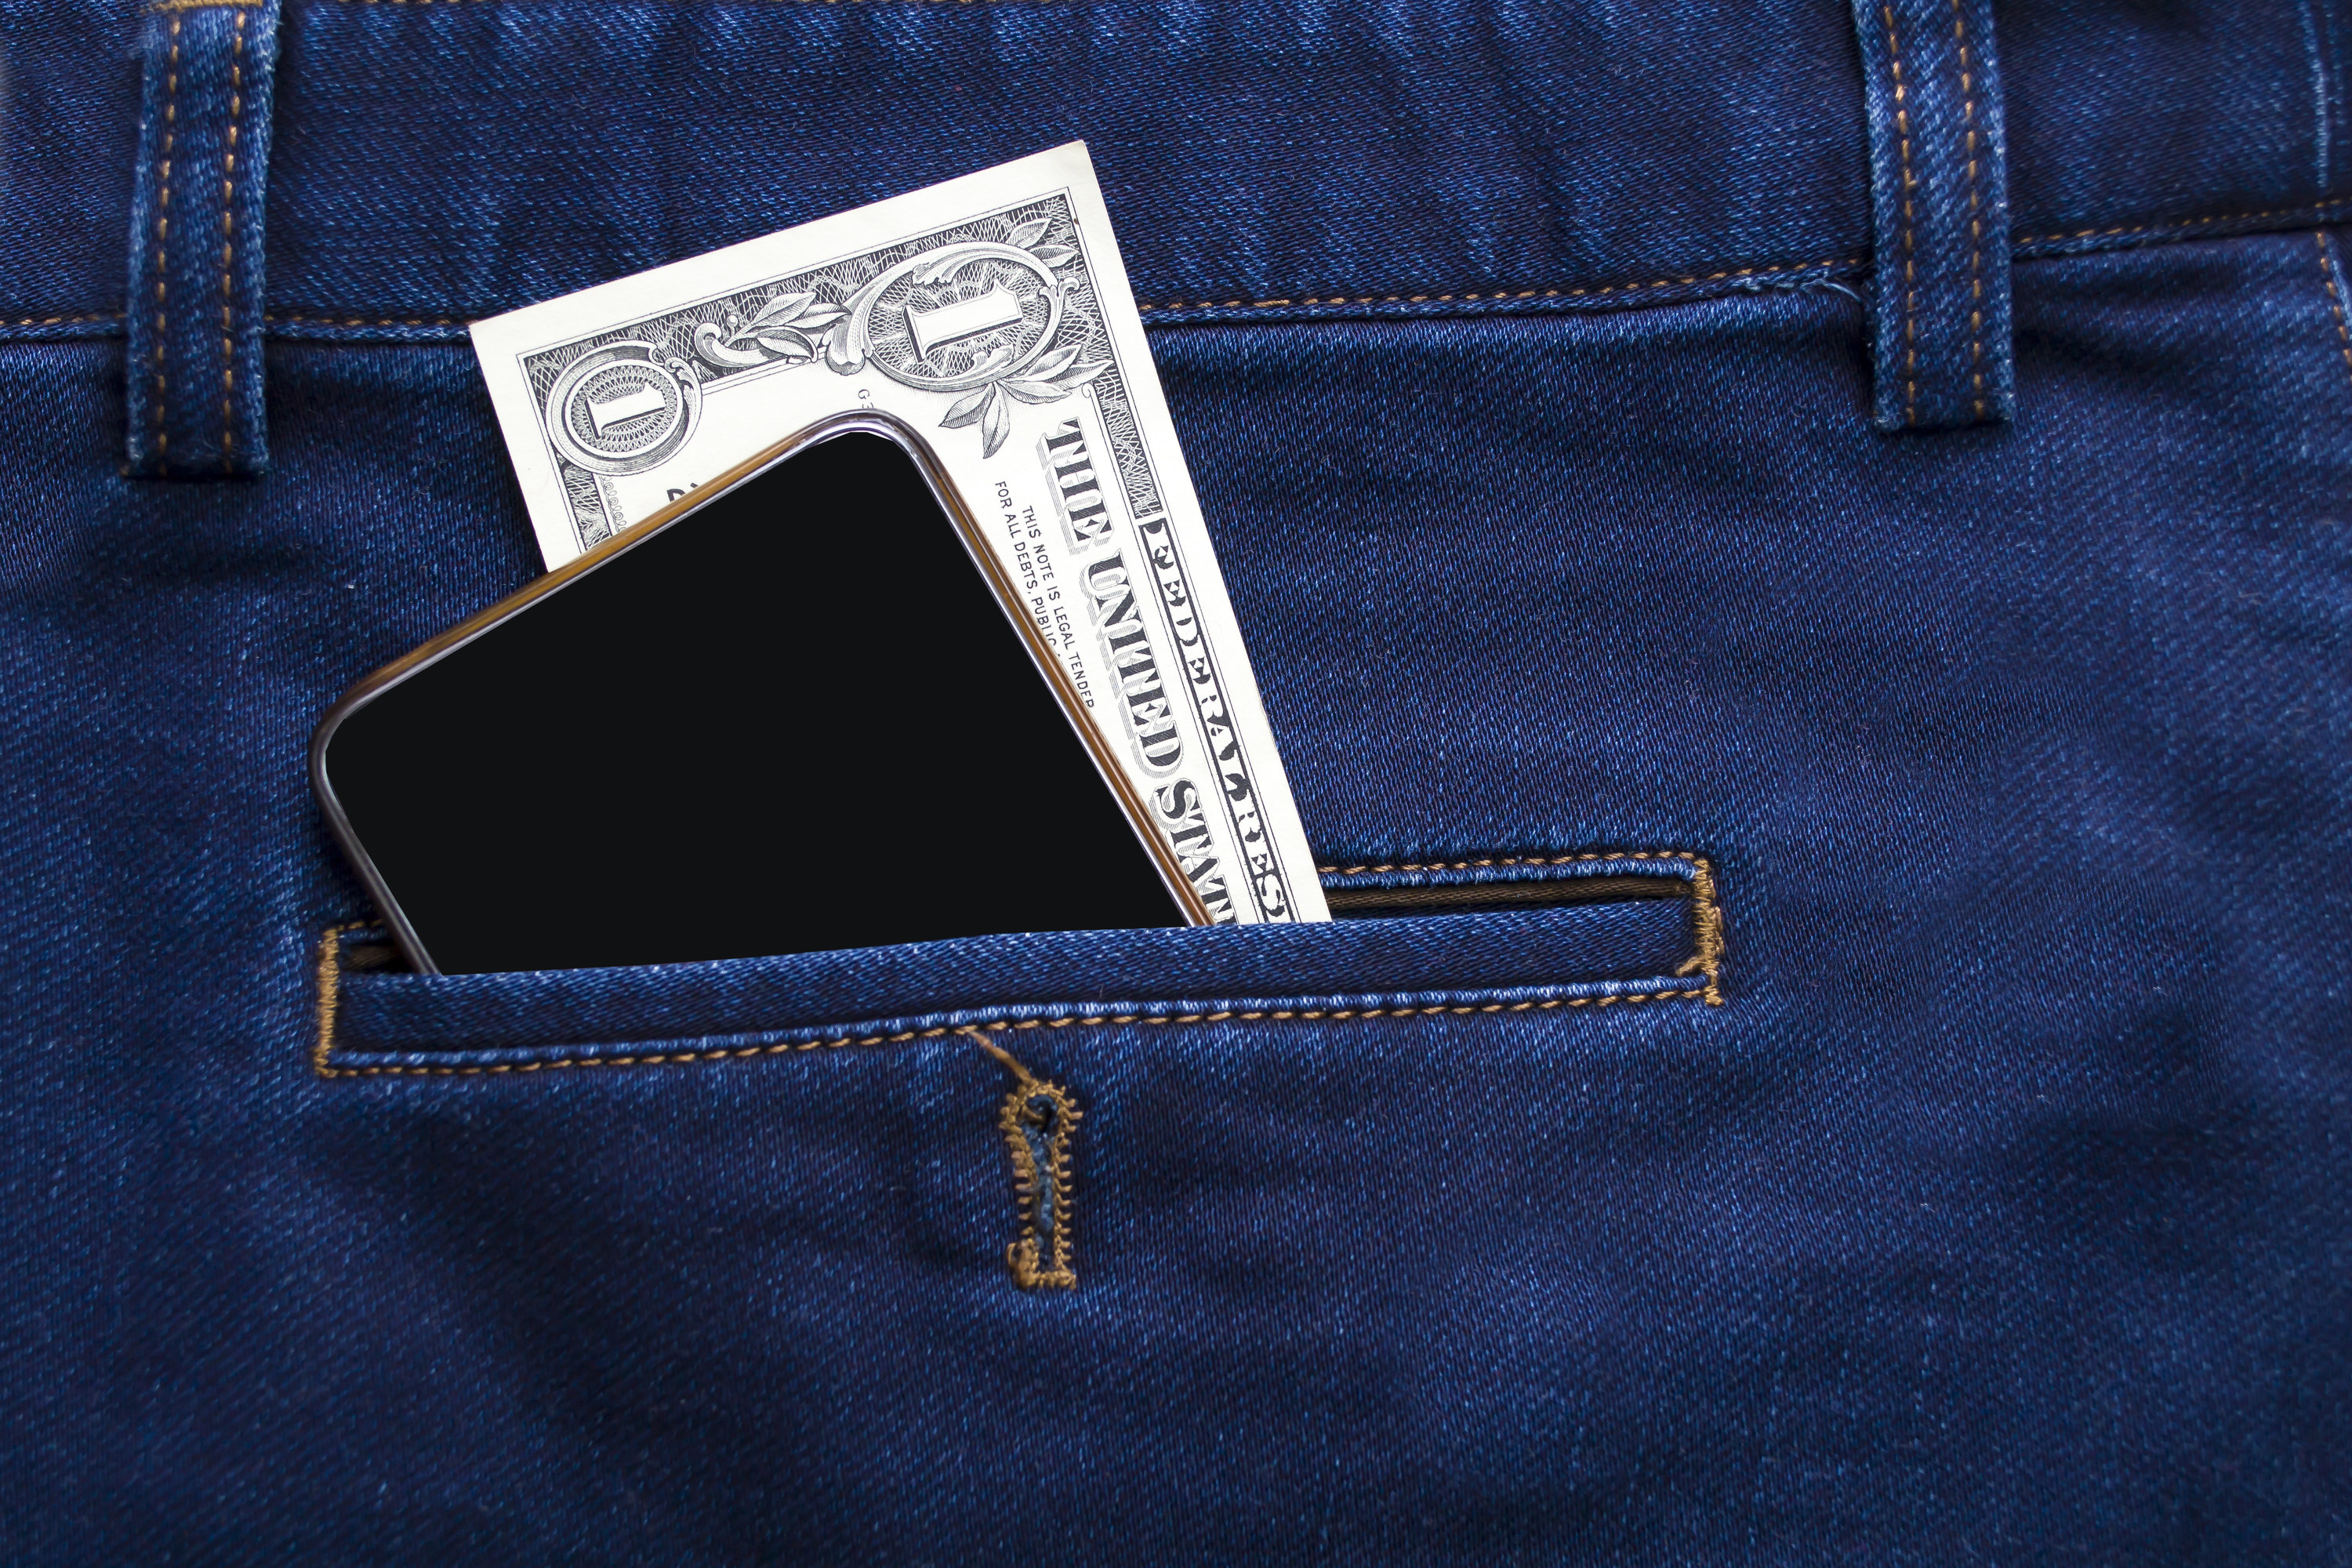 Money and phone in jeans pocket